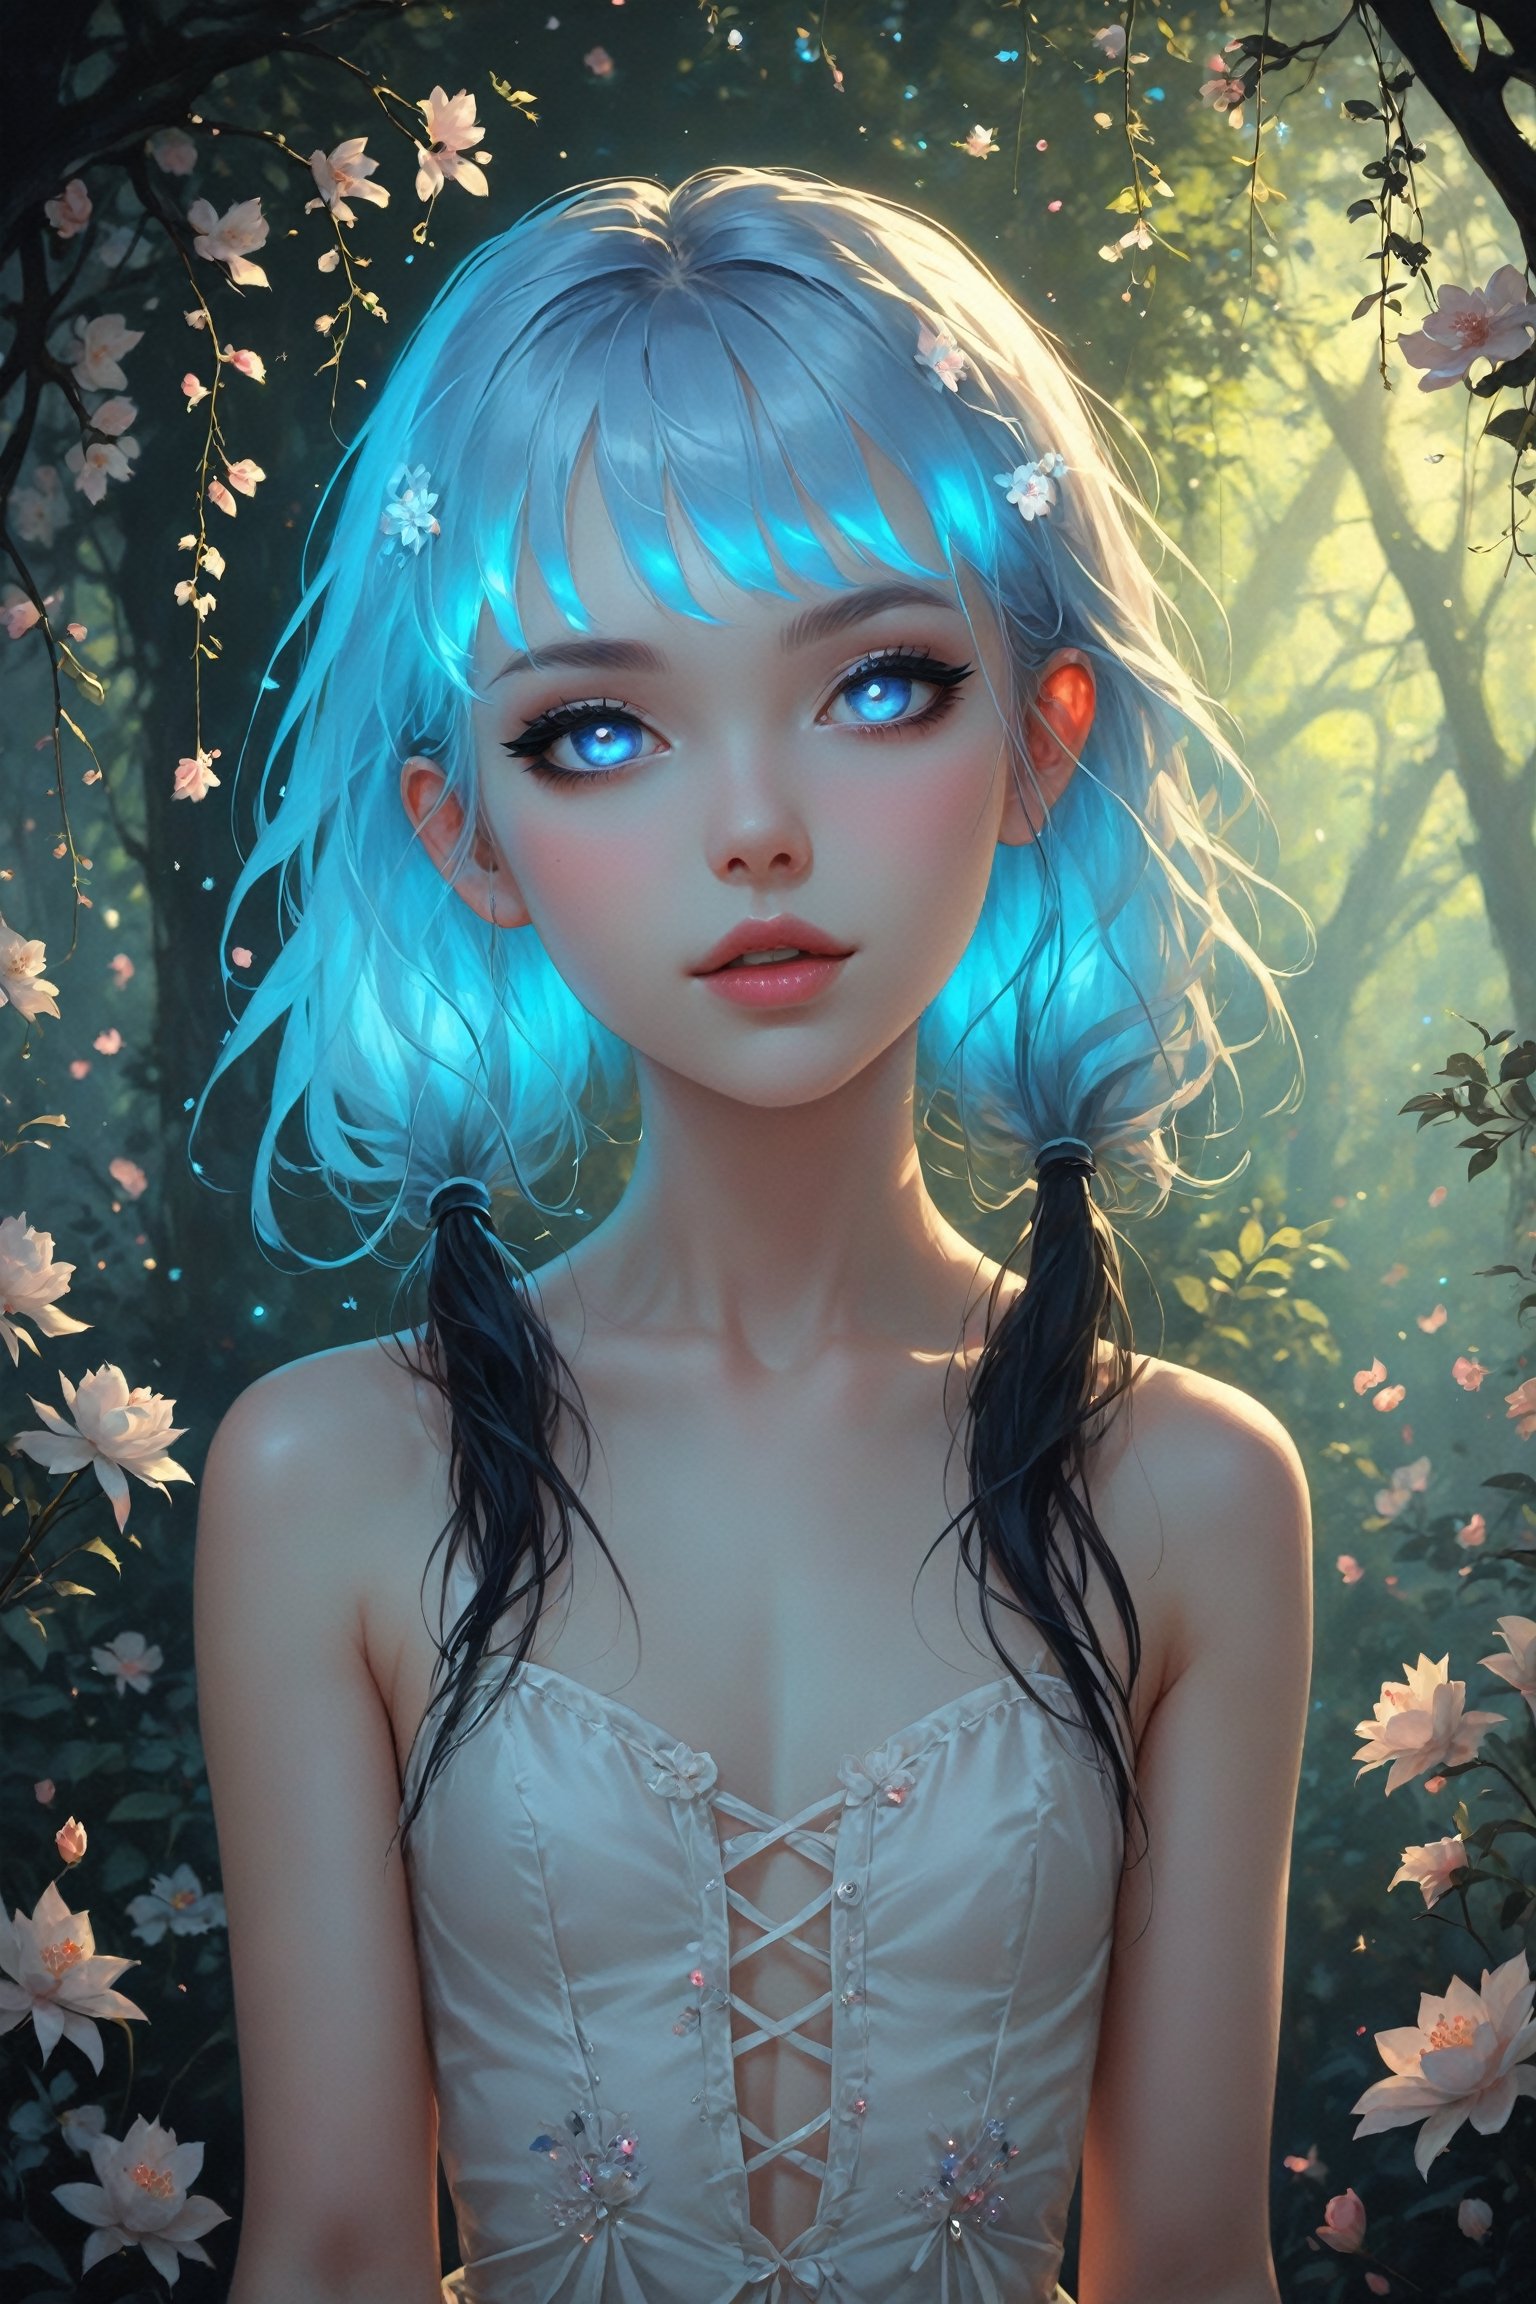  delicate albino Pixie girl,crystal hair,
Beautiful blue eyes, soft expression, (heavy black eyeshadow:1.2), Depth and Dimension in the Pupils,Seven-colored hair that shines vaguely,(colorful hair),
She stands in stillness, adorned with soft, pale-colored petals and delicate flowers cascading from her hair, creating a dreamlike beauty. Her eyes, silver or pale blue, convey mystery and wonder as she moves gracefully through the enchanting landscape.,zavy-hrglw,Rainbow haired girl 